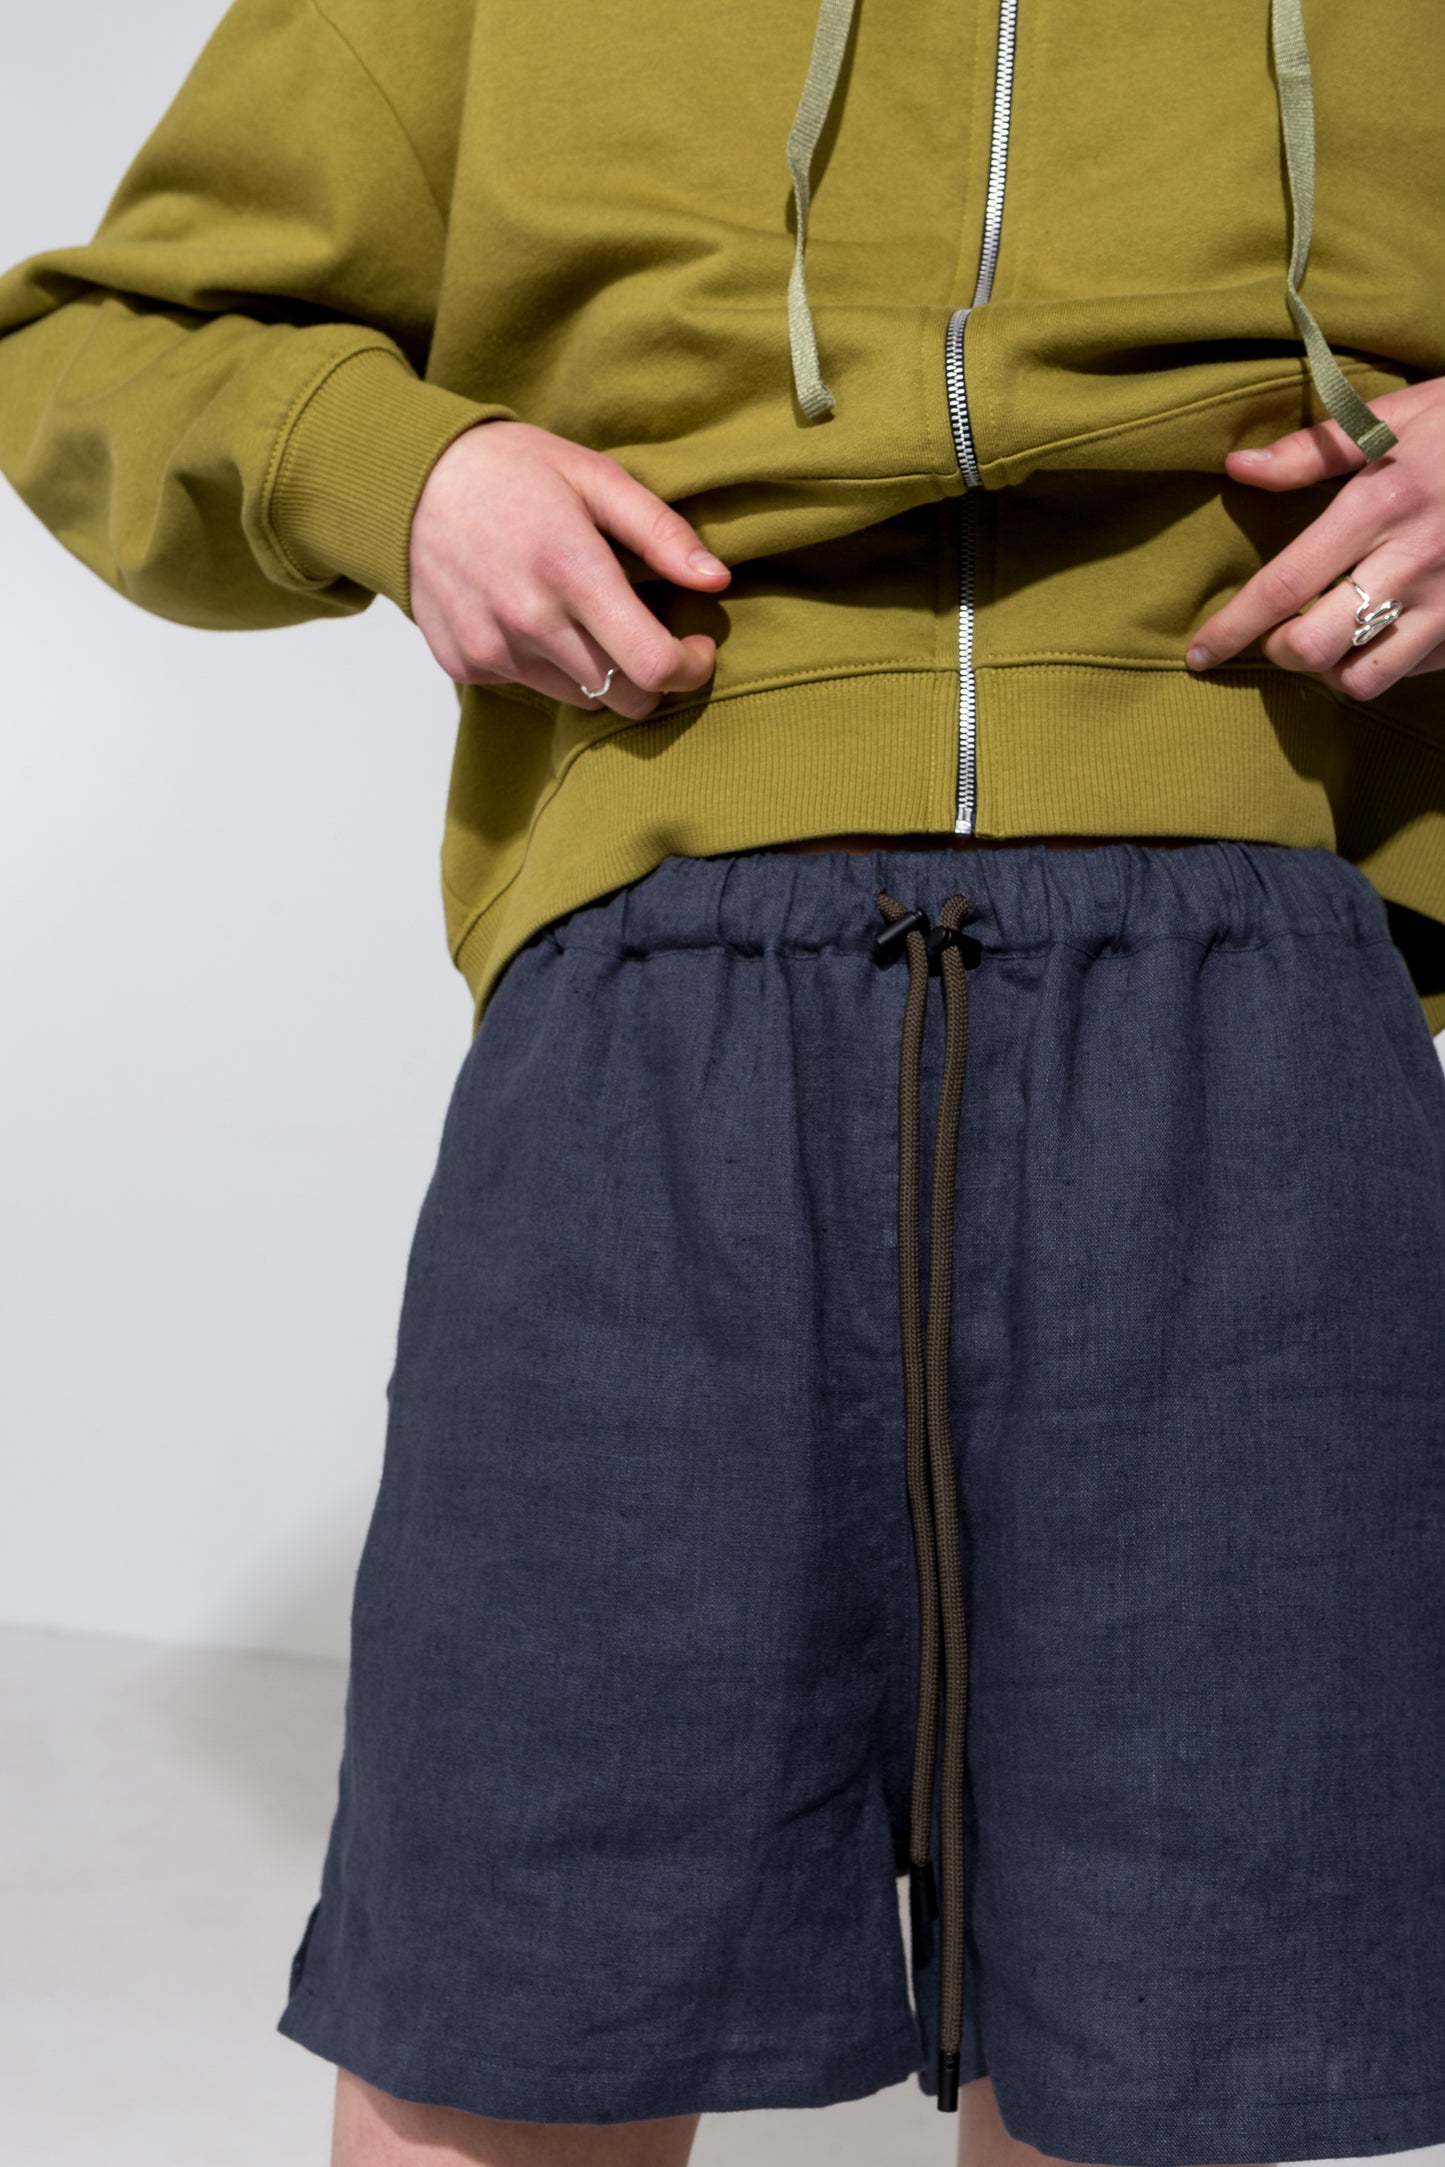 Relaxed fit linen shorts in dark grey and hoodie in olive green